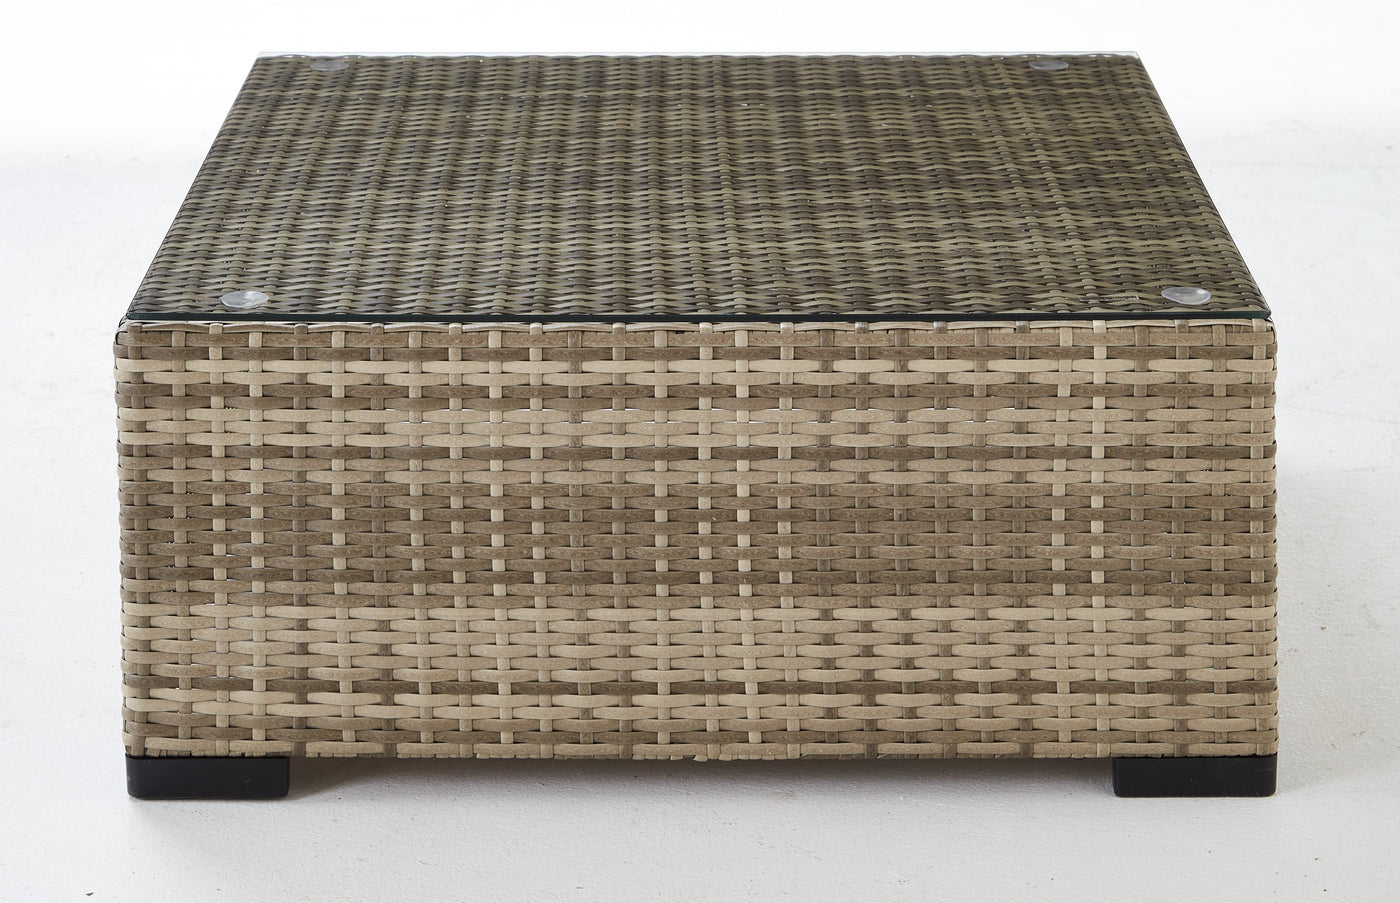 Caribe Outdoor Coffee Table - Navy